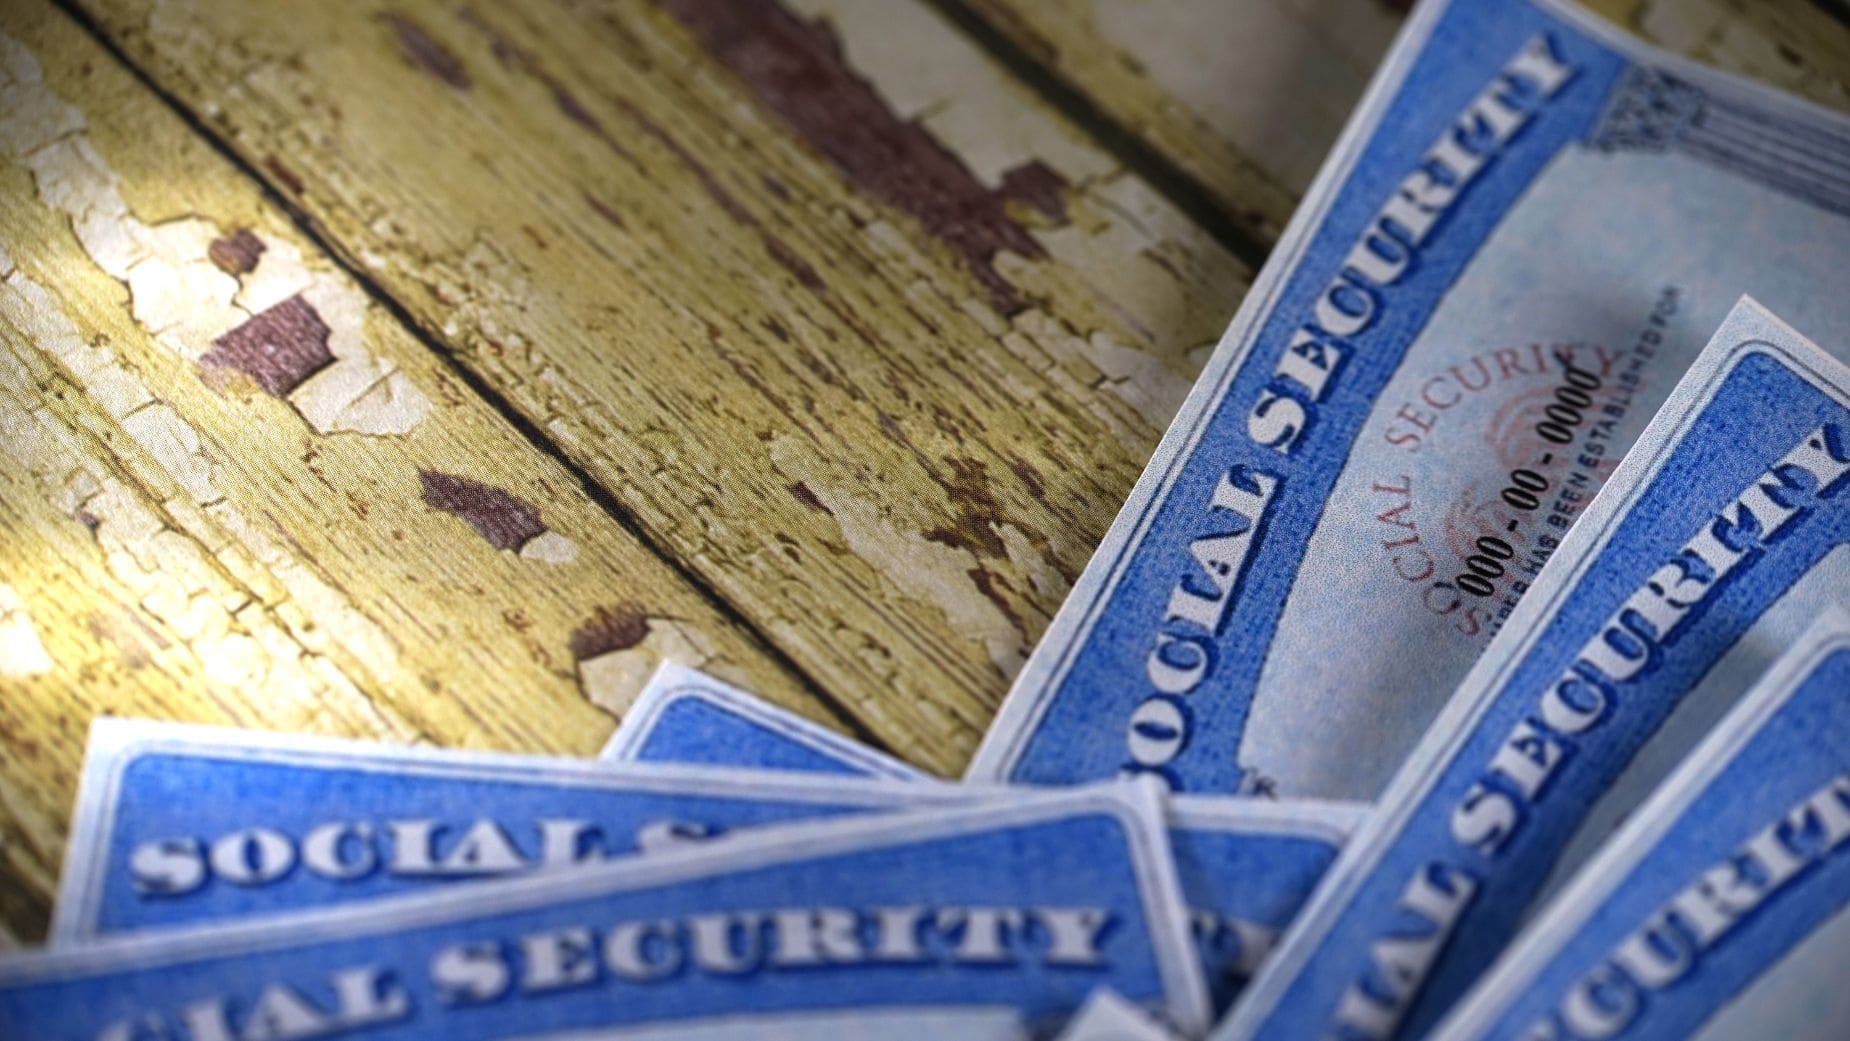 This is the calendar of Social Security payments in the next month